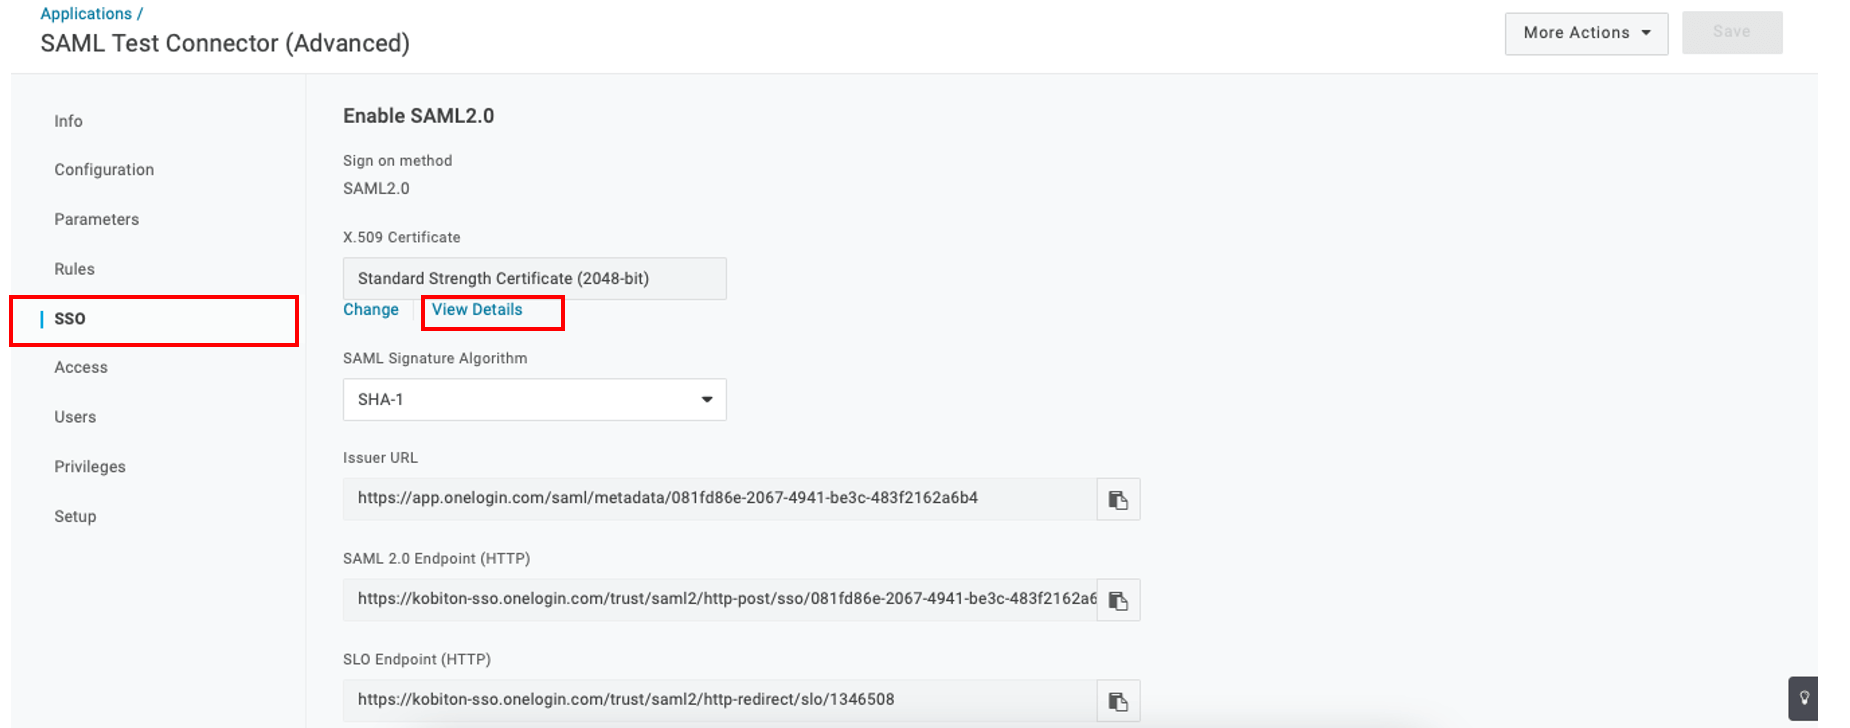 Select SSO in SAML Test Connector